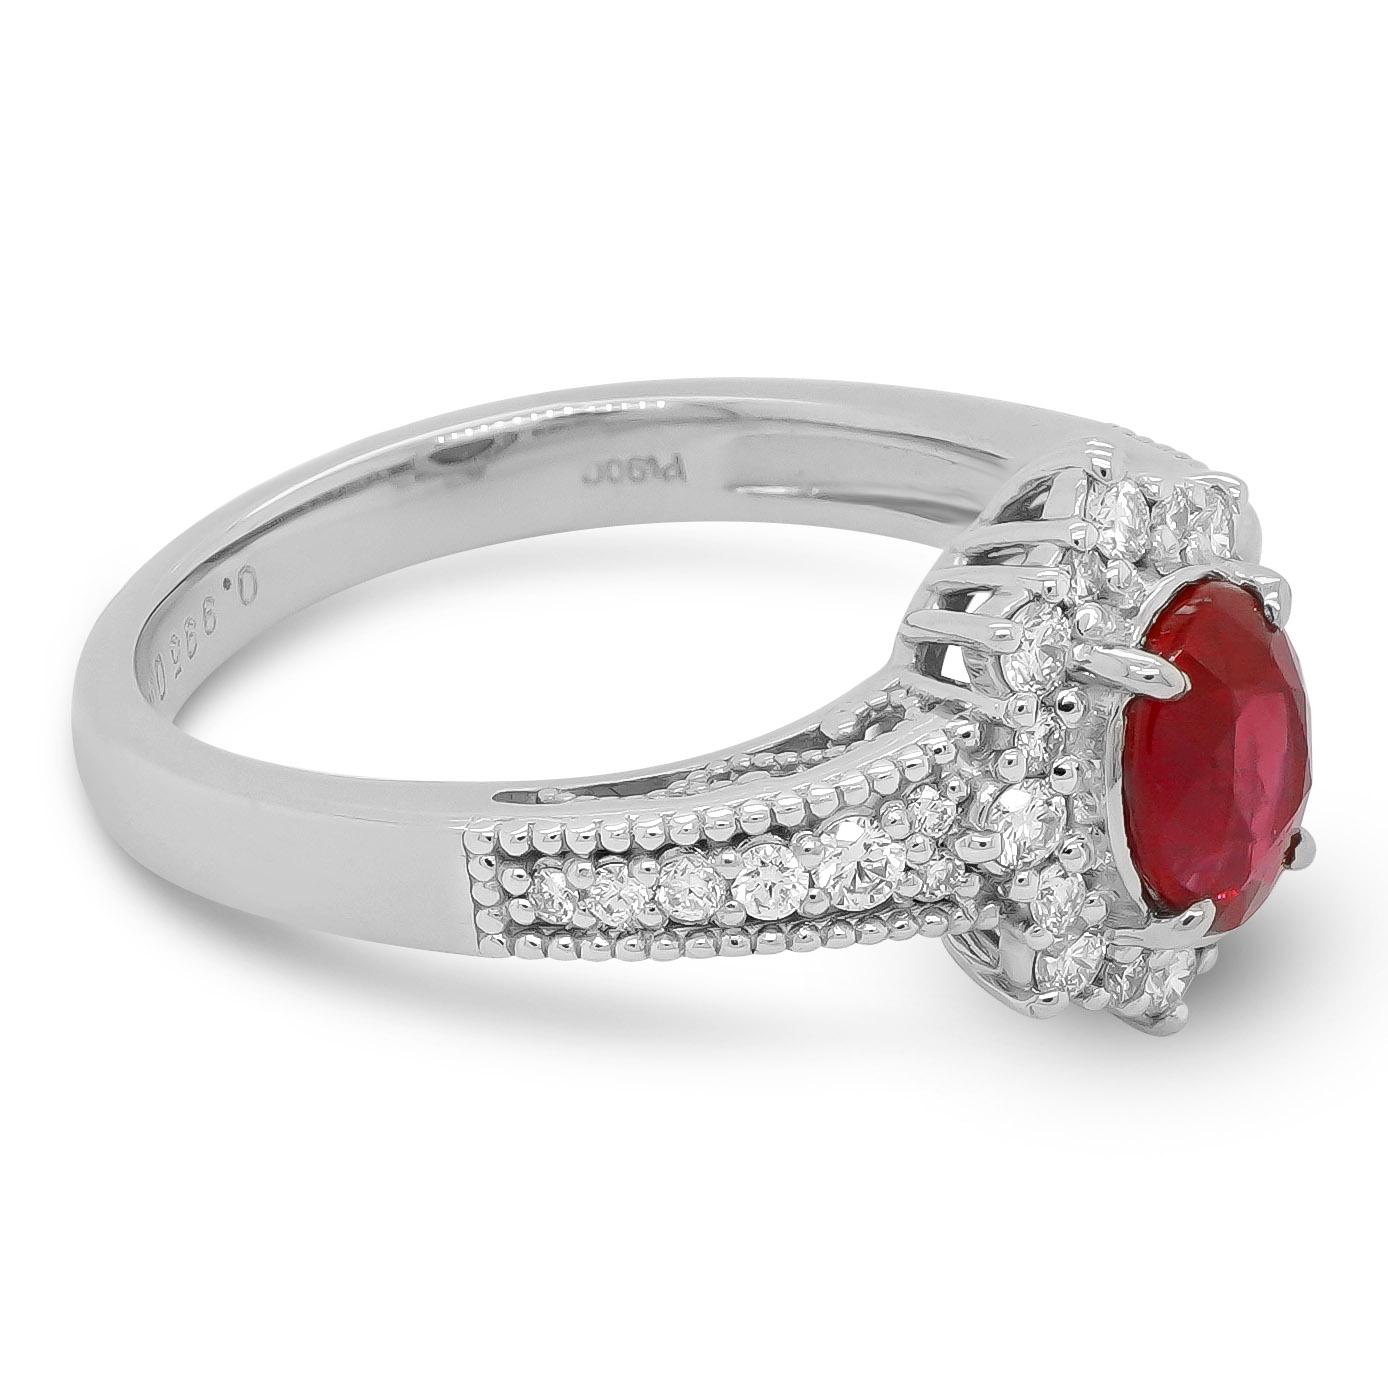 A JGGL Certified Burmese Ruby weighing around 1 carat is set along with 0.26 carat of white brilliant round diamond. The ring is made in PT 900 and has been manufactured in Japan. 
The image of the certificate can be found along with the images of